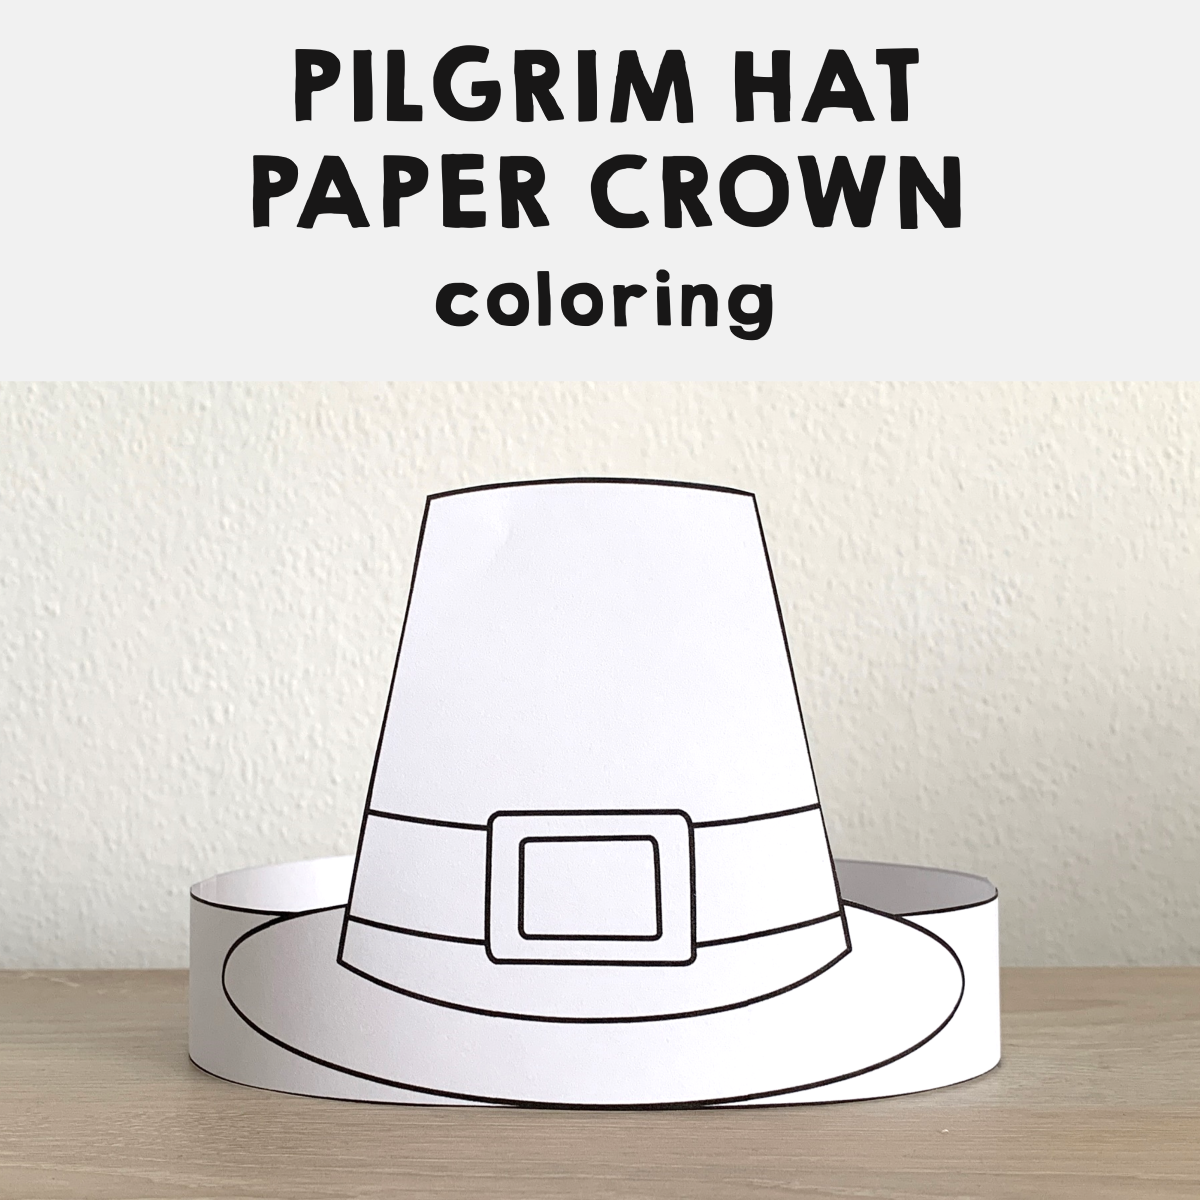 Pilgrim hat paper crown printable coloring thanksgiving craft activity made by teachers